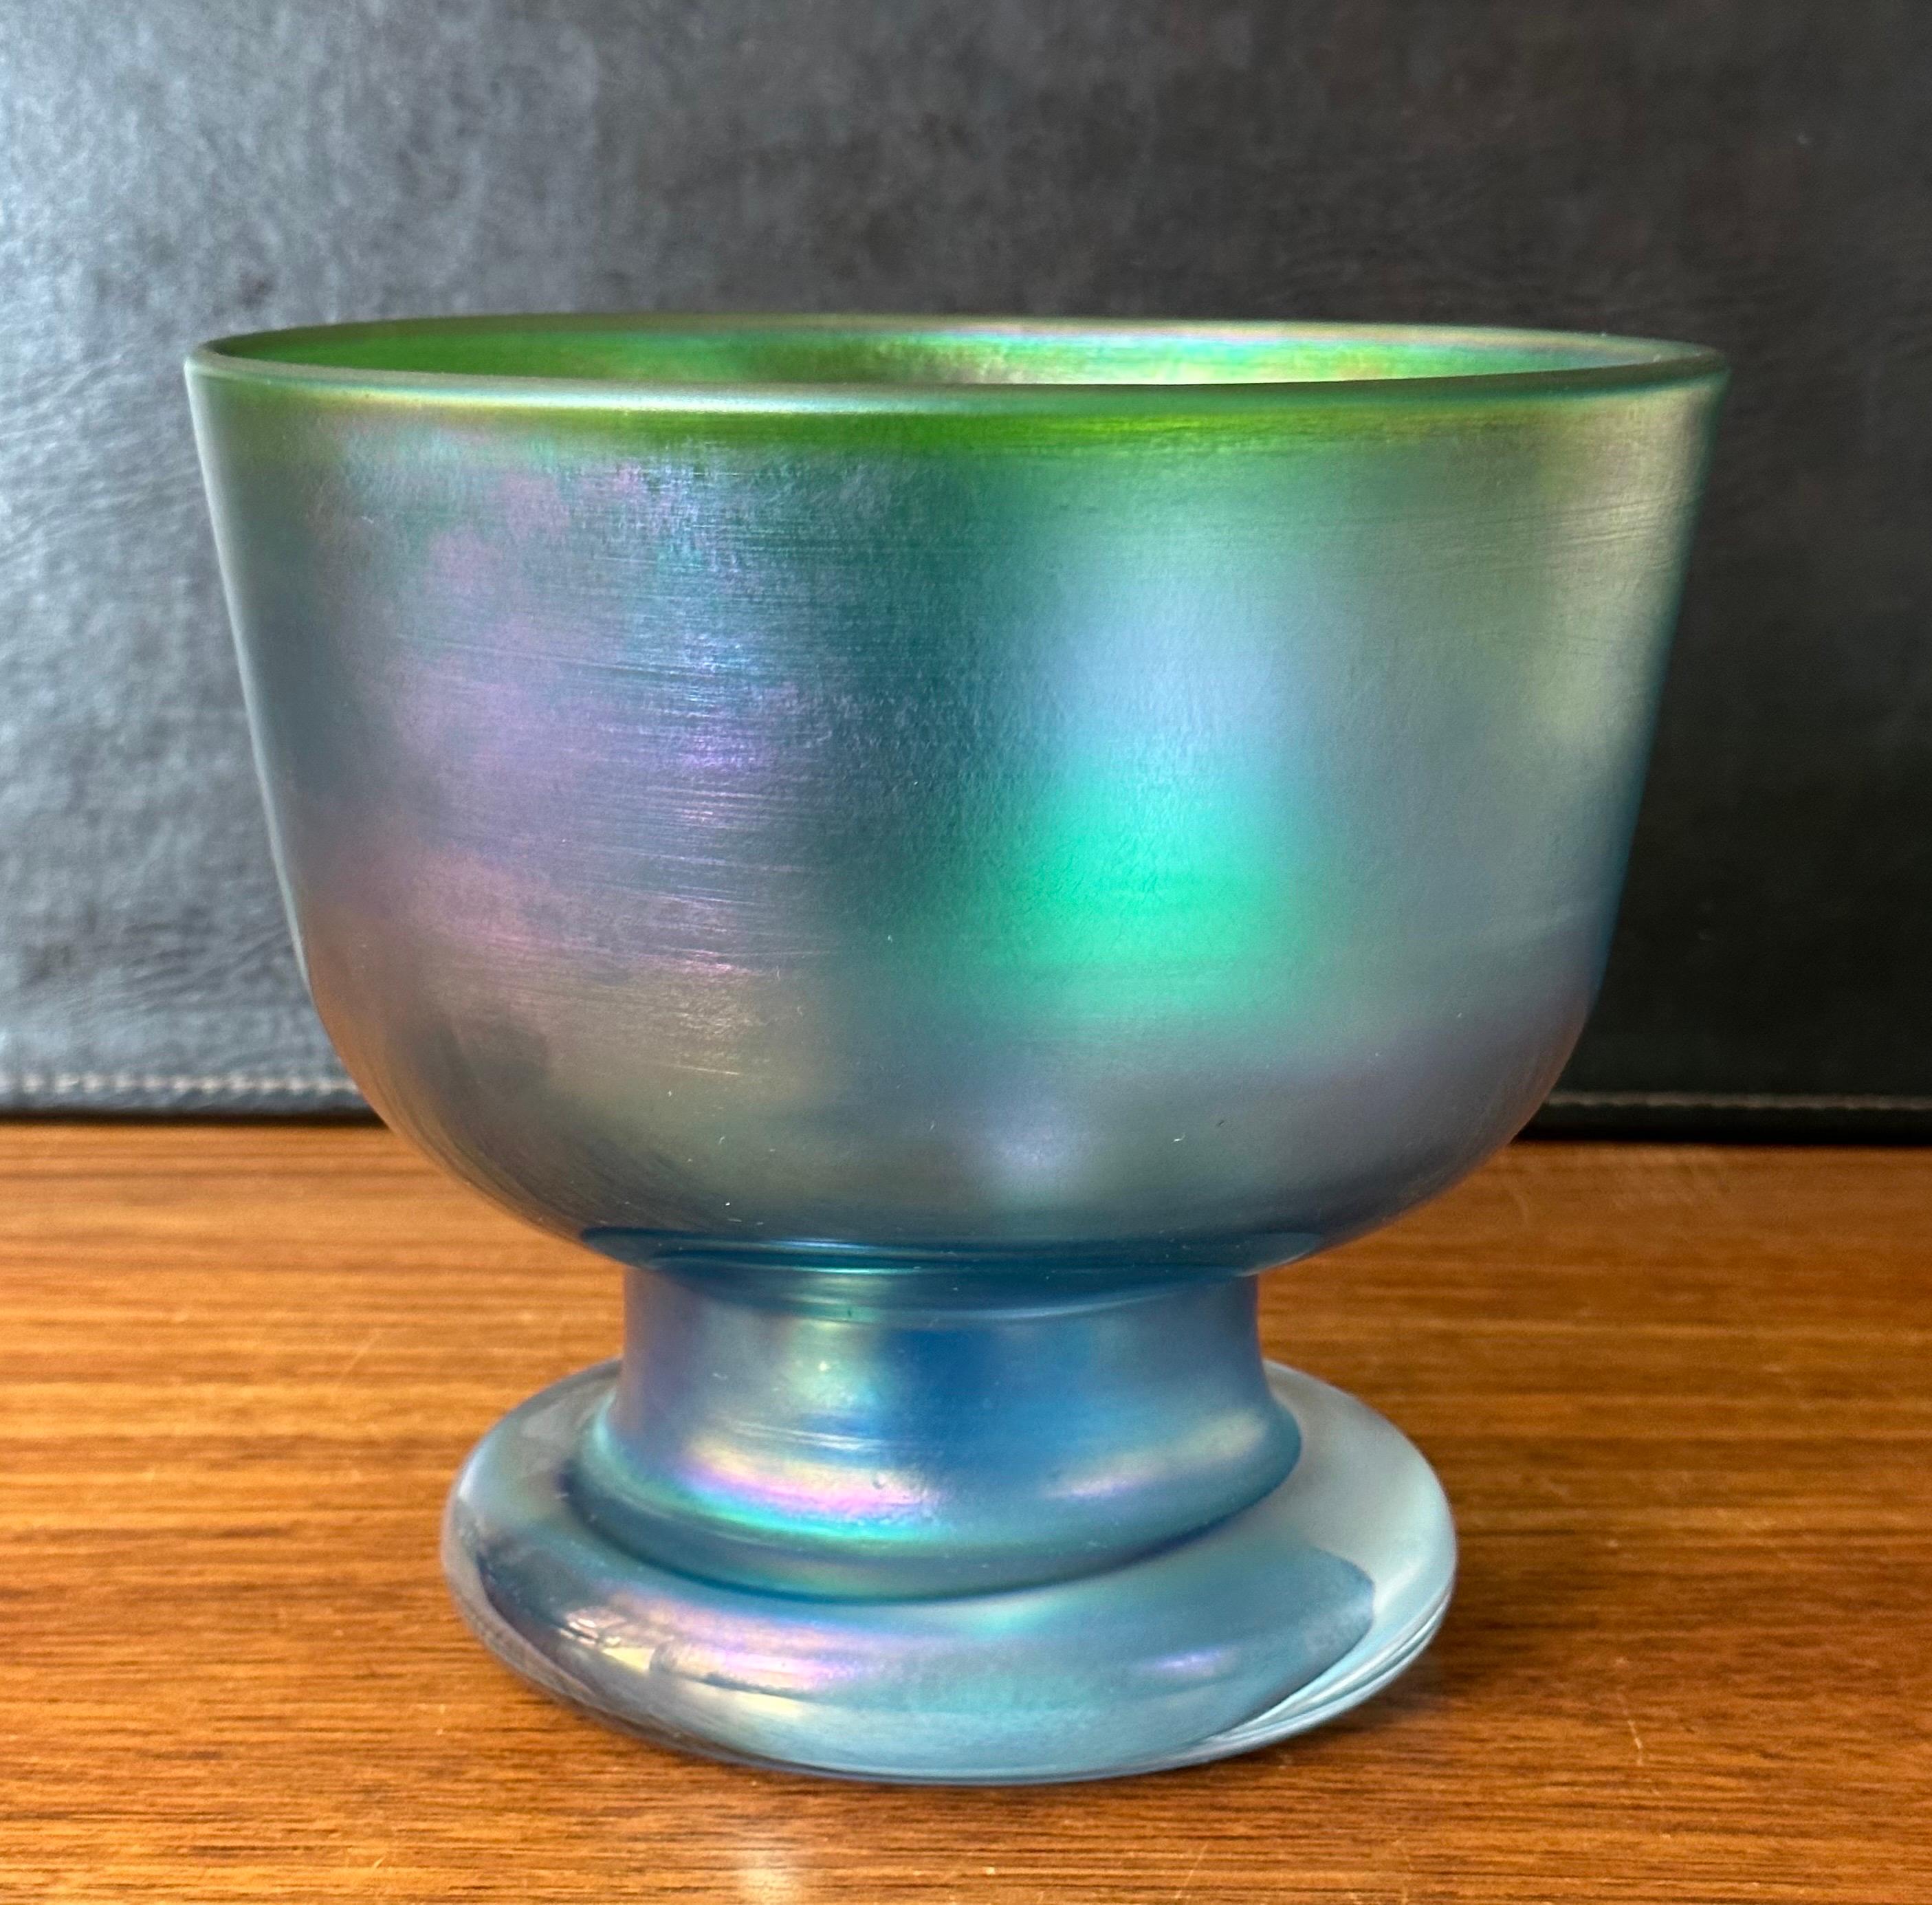 Iridescent Footed Art Glass Vase / Bowl by Bertil Vallien for Boda Abfors In Good Condition For Sale In San Diego, CA